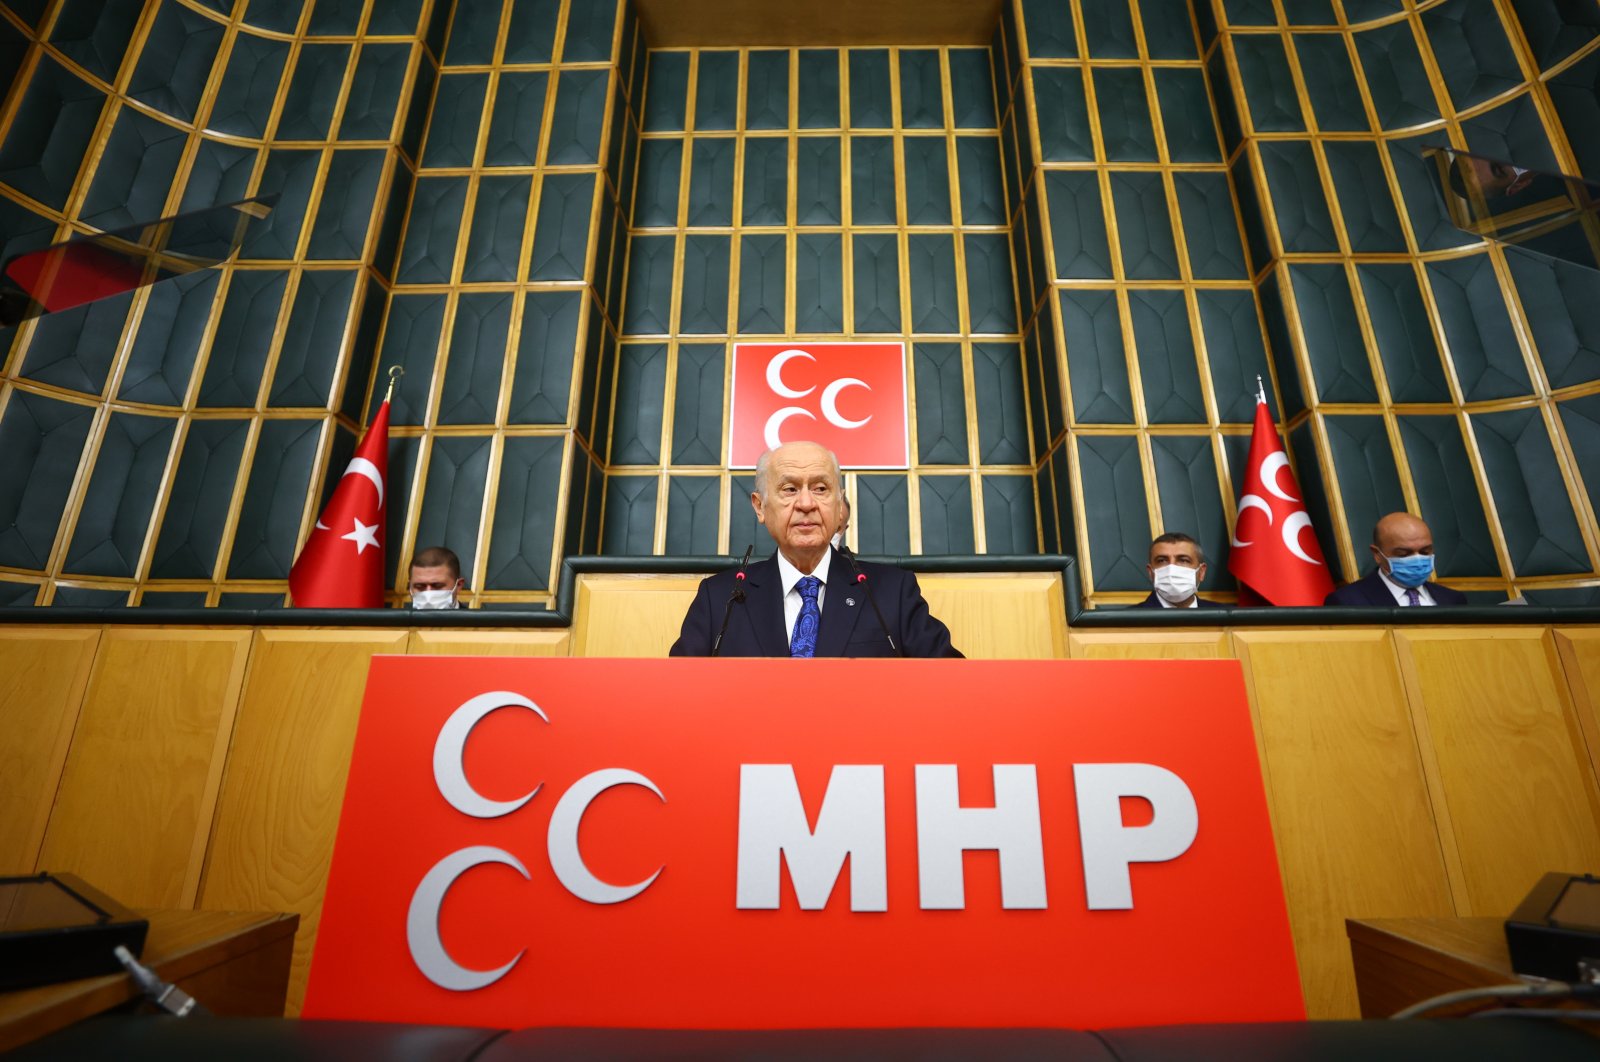 Nationalist Movement Party (MHP) Chairperson Devlet Bahçeli speaks at his party's parliamentary group meeting in Ankara, Turkey, Nov. 9, 2021. (AA Photo)